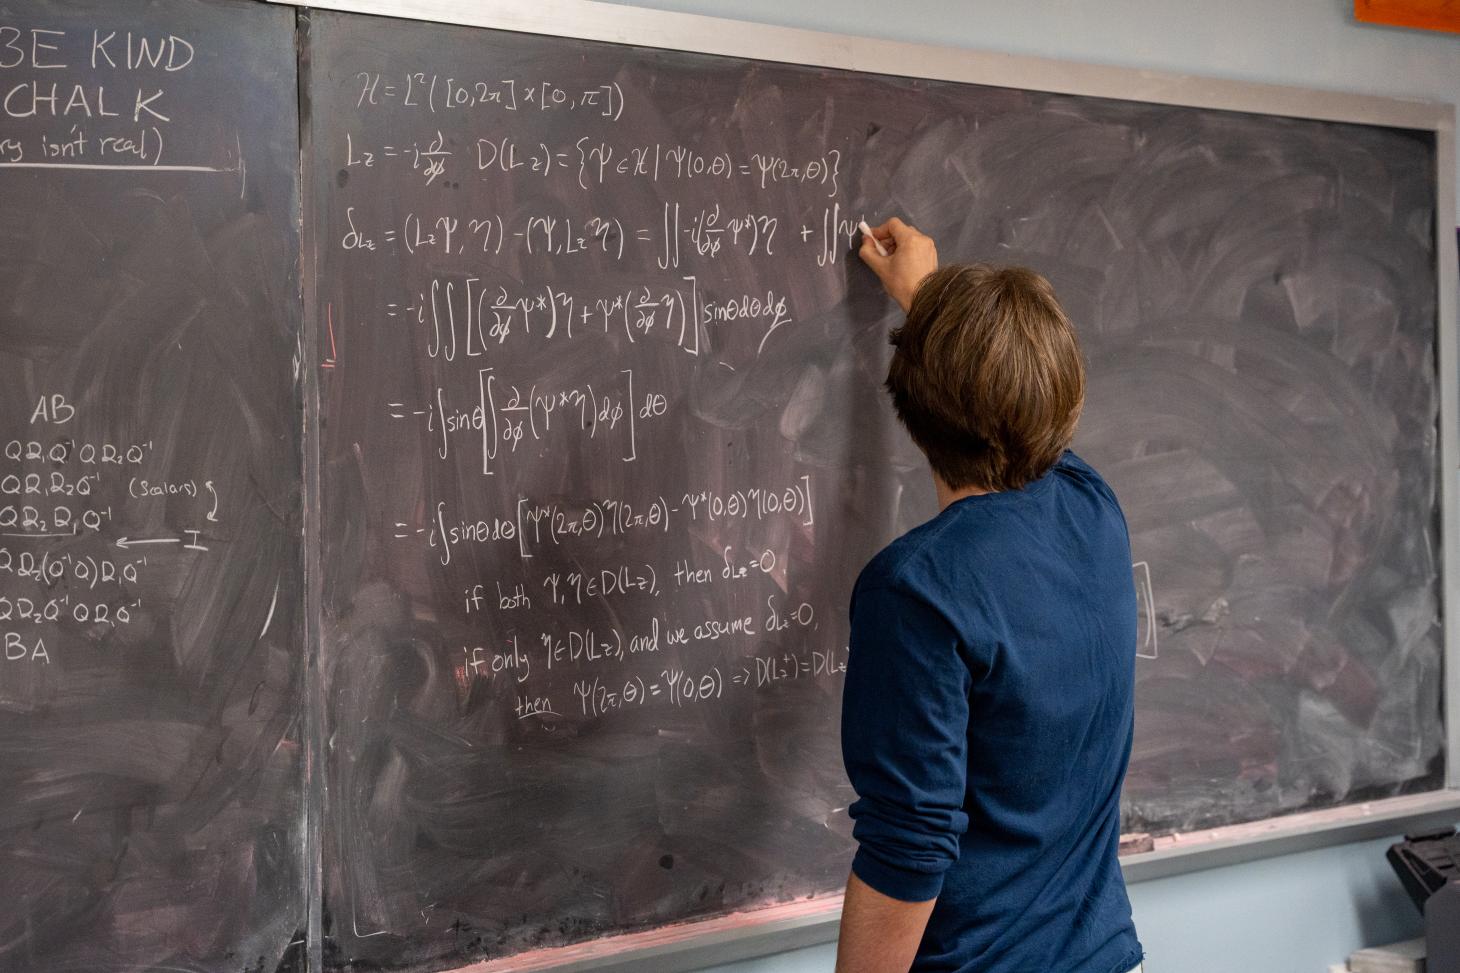 Takach fills a chalkboard with mathematical equations, with his back faced to the camera.